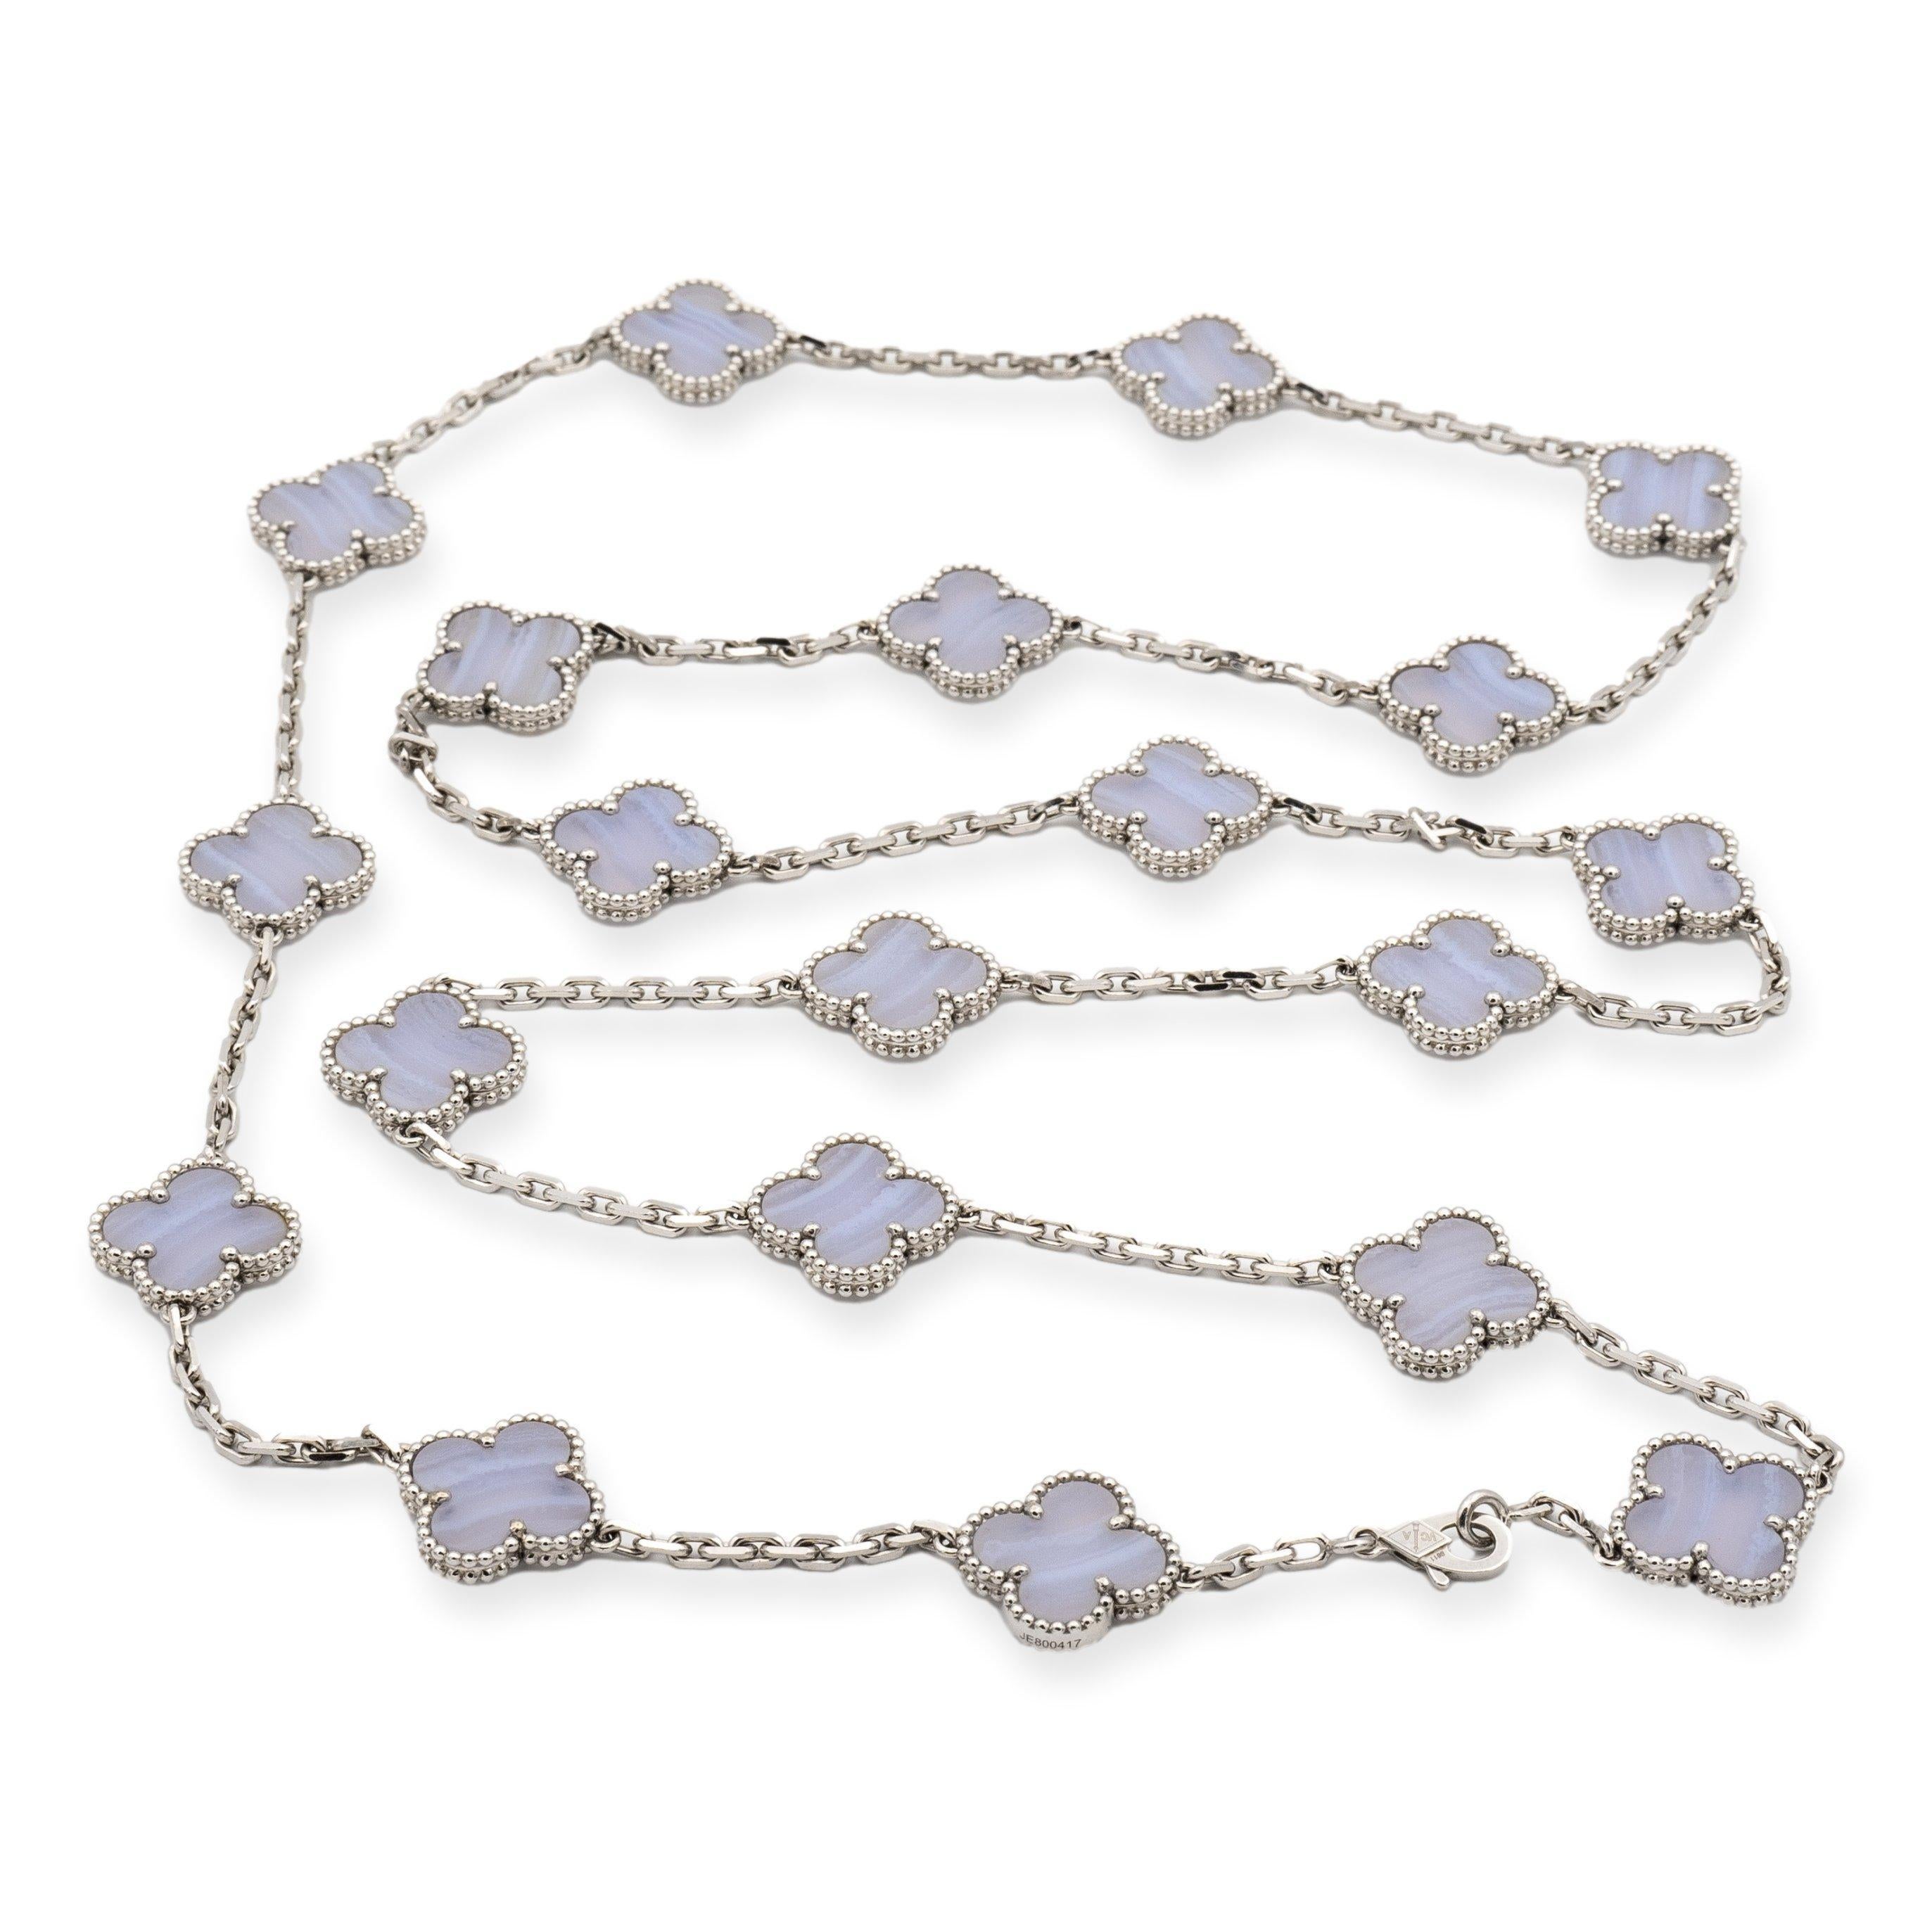 Van Cleef & Arpels necklace from the Vintage Alhambra collection, meticulously crafted in 18 karat white gold featuring 20 chalcedony stones elegantly encased within the iconic clover motifs. The necklace extends to a length of 33.8 inches, with